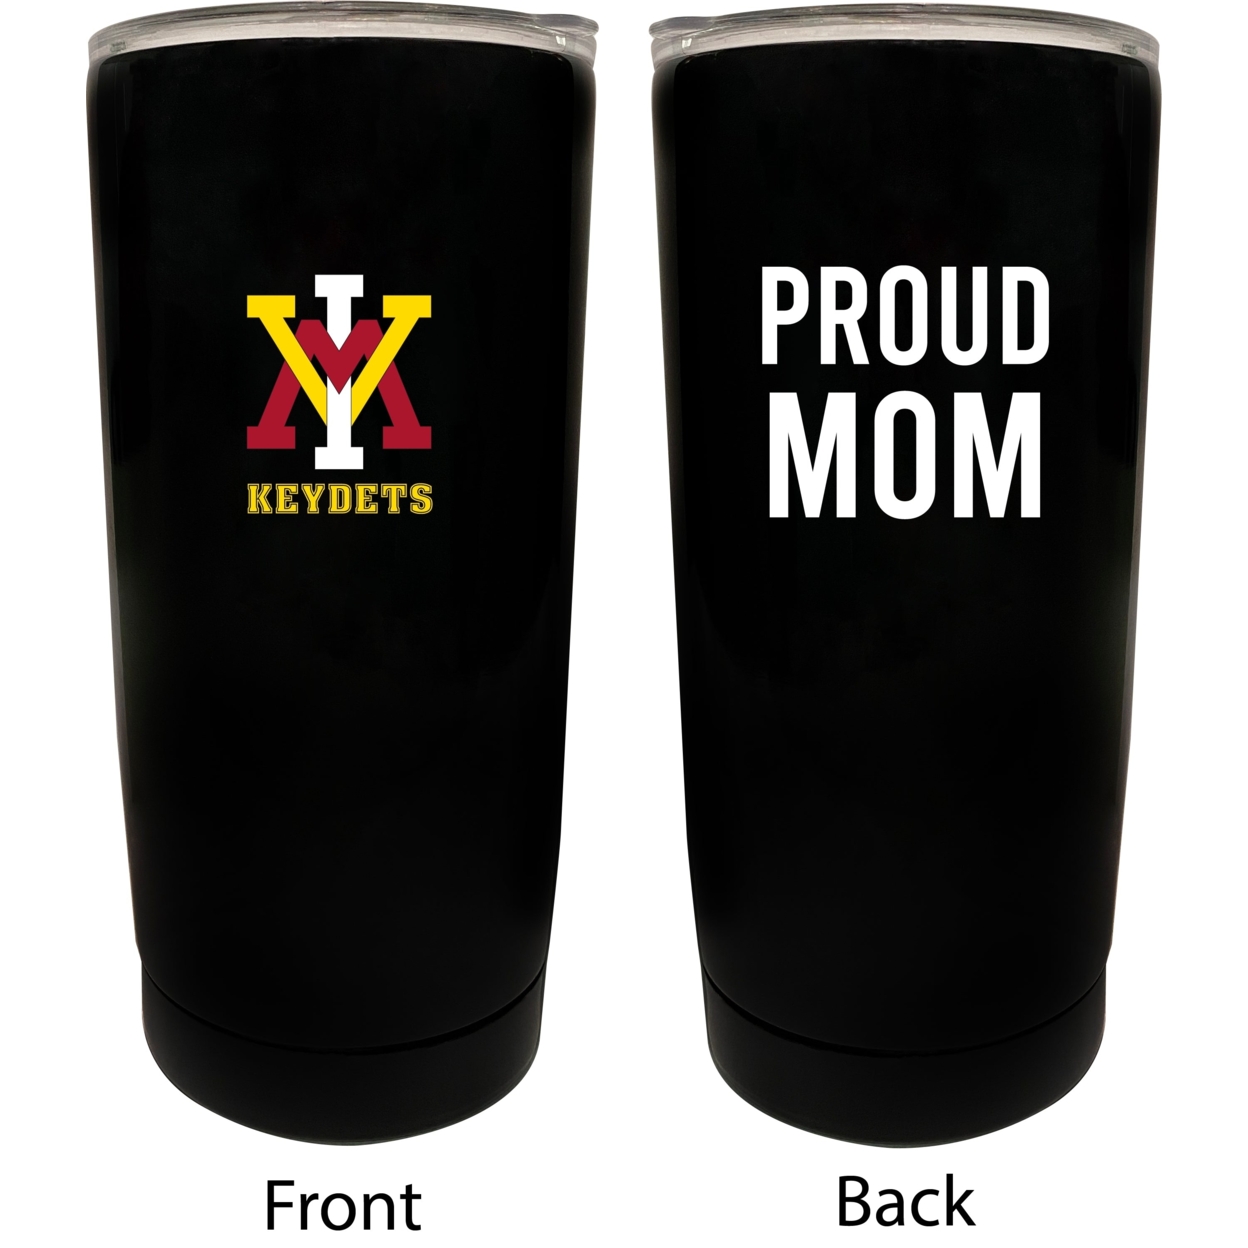 VMI Keydets Proud Mom 16 Oz Insulated Stainless Steel Tumblers